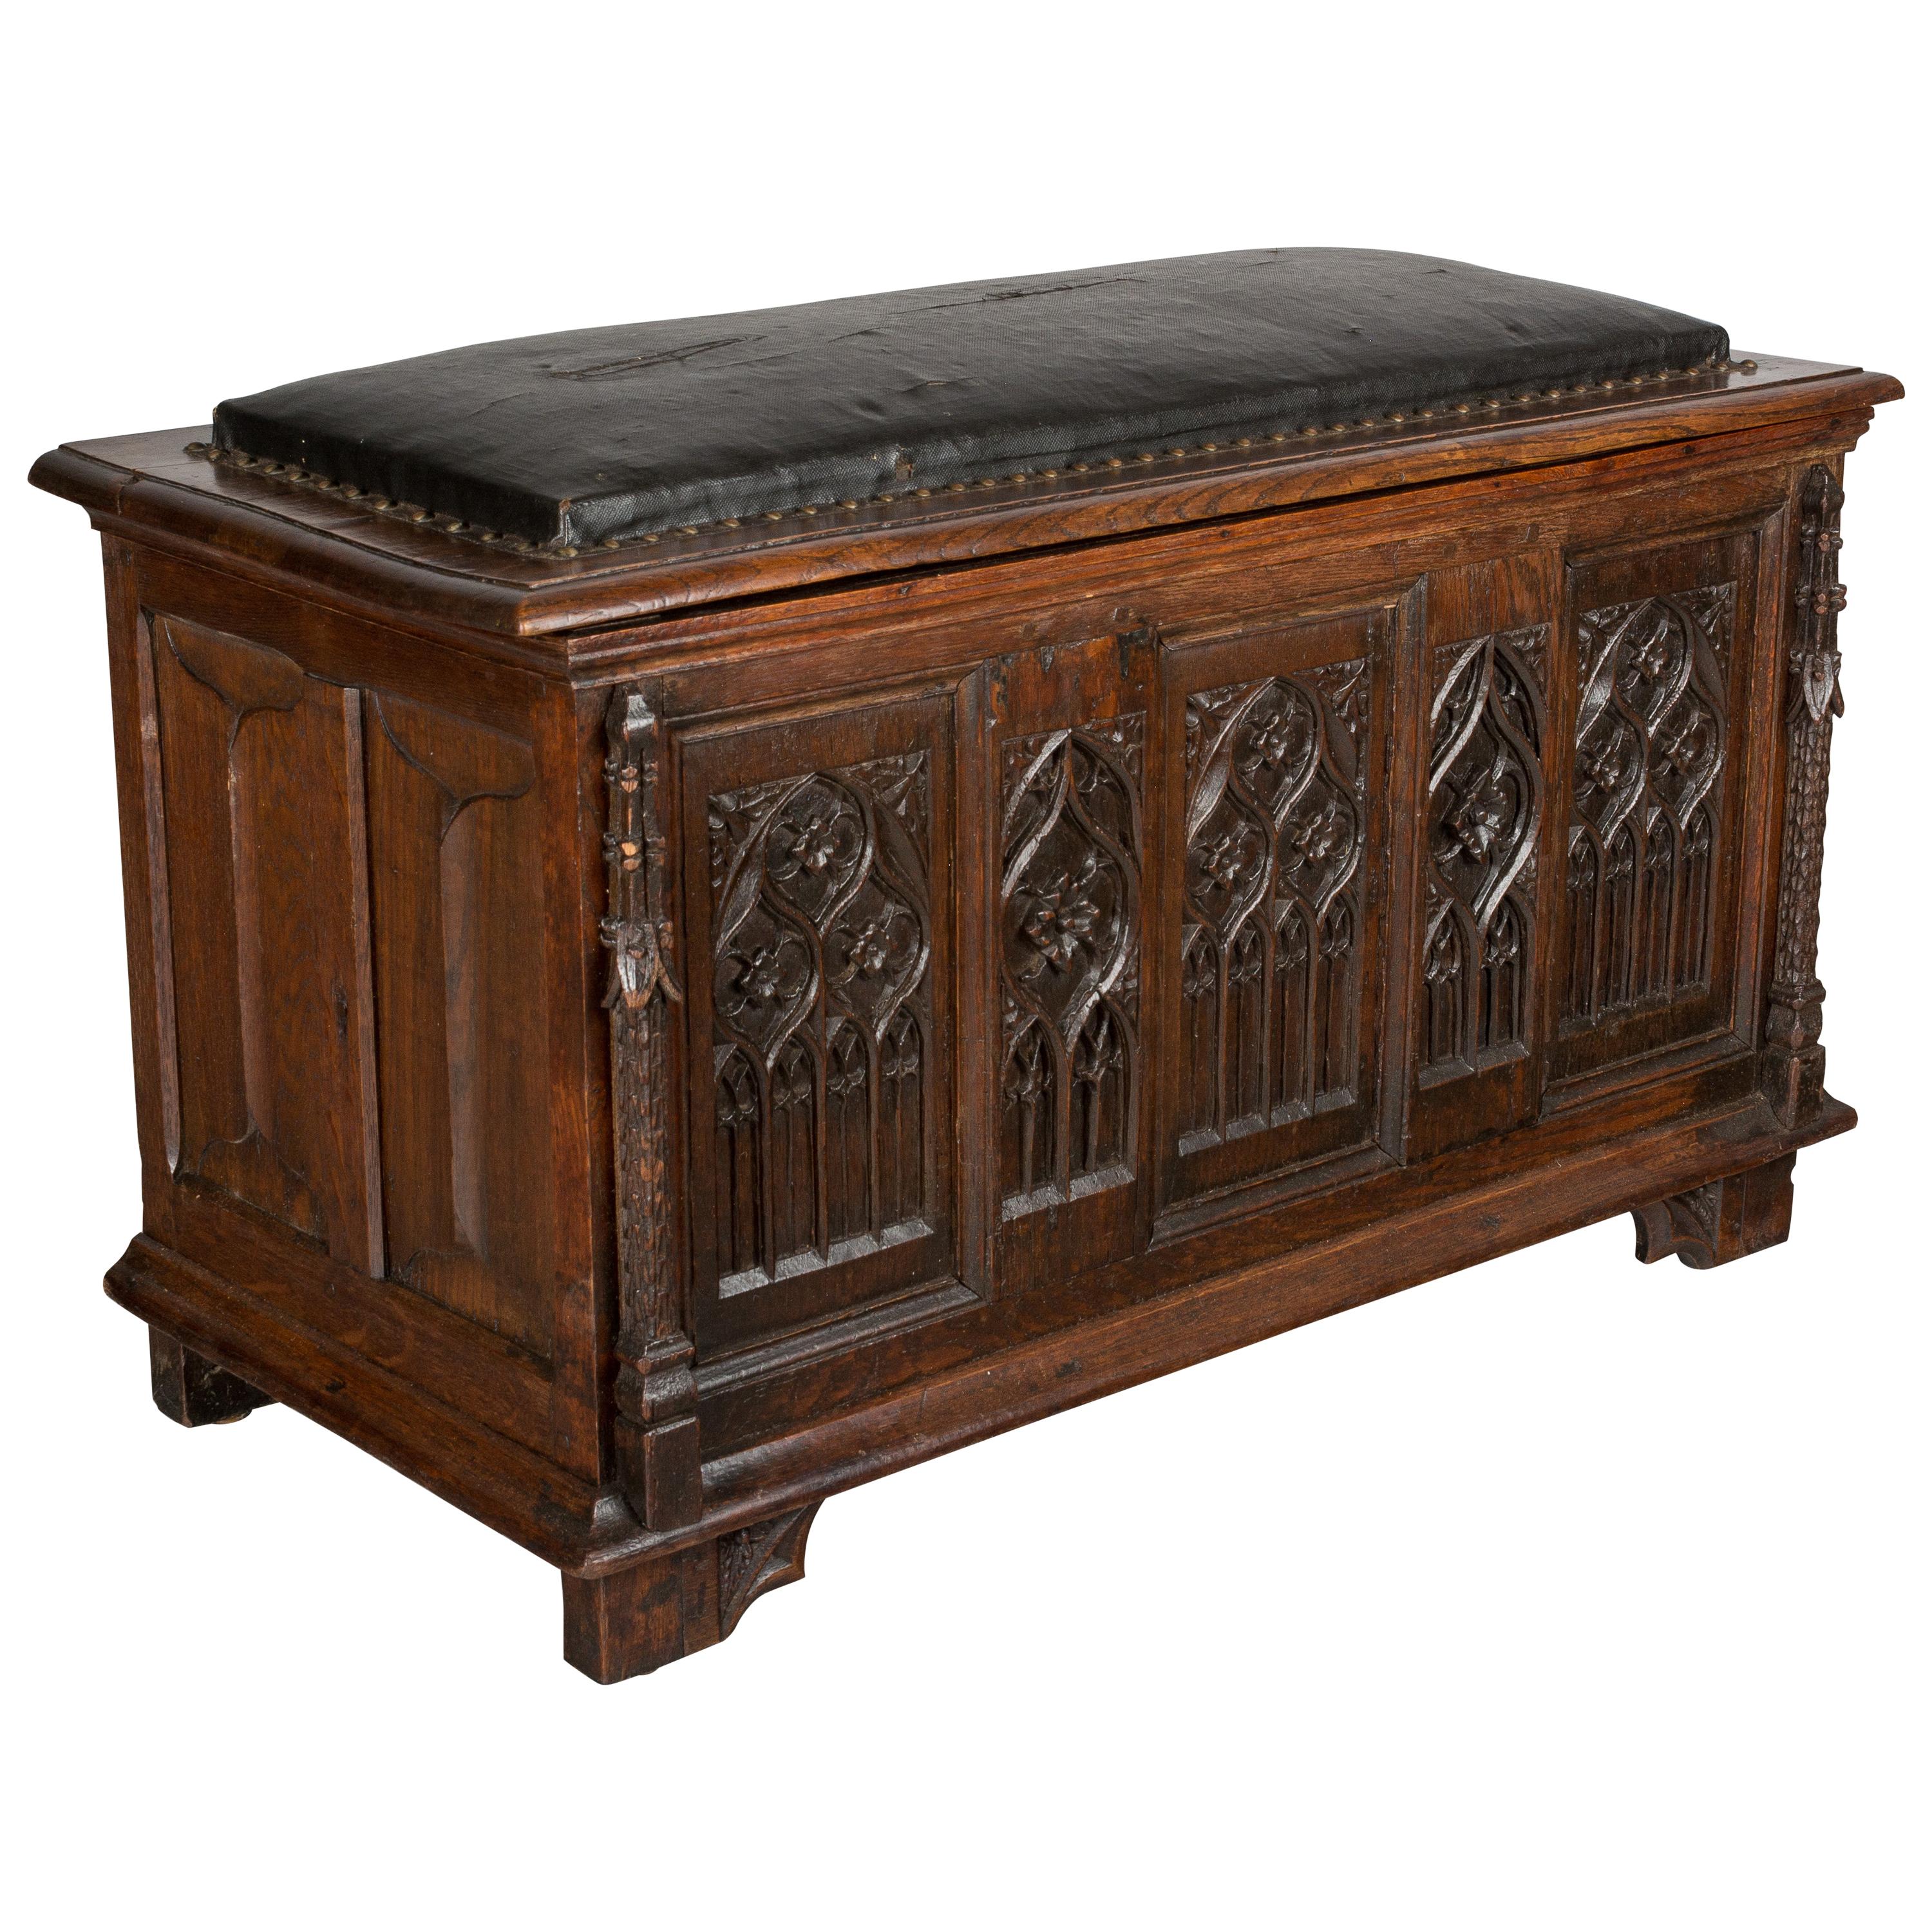 Gothic Revival Blanket Chest or Bench